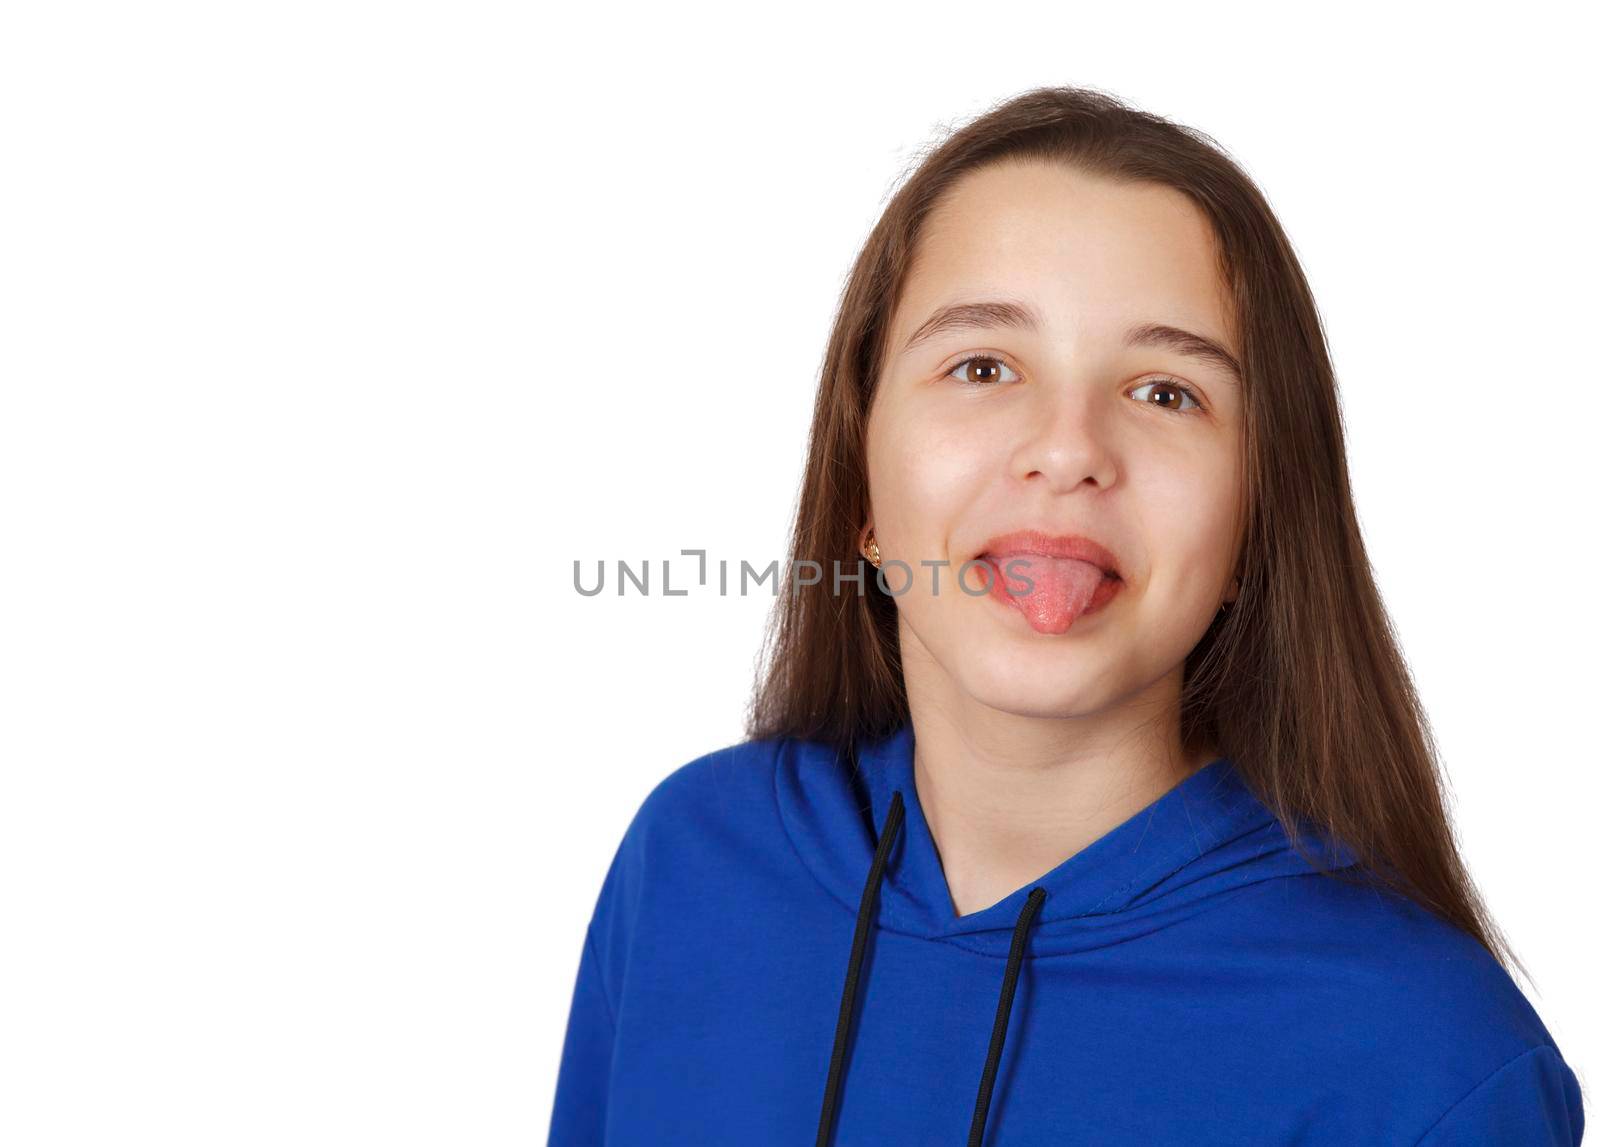 teen girl showing tongue in studio on white background